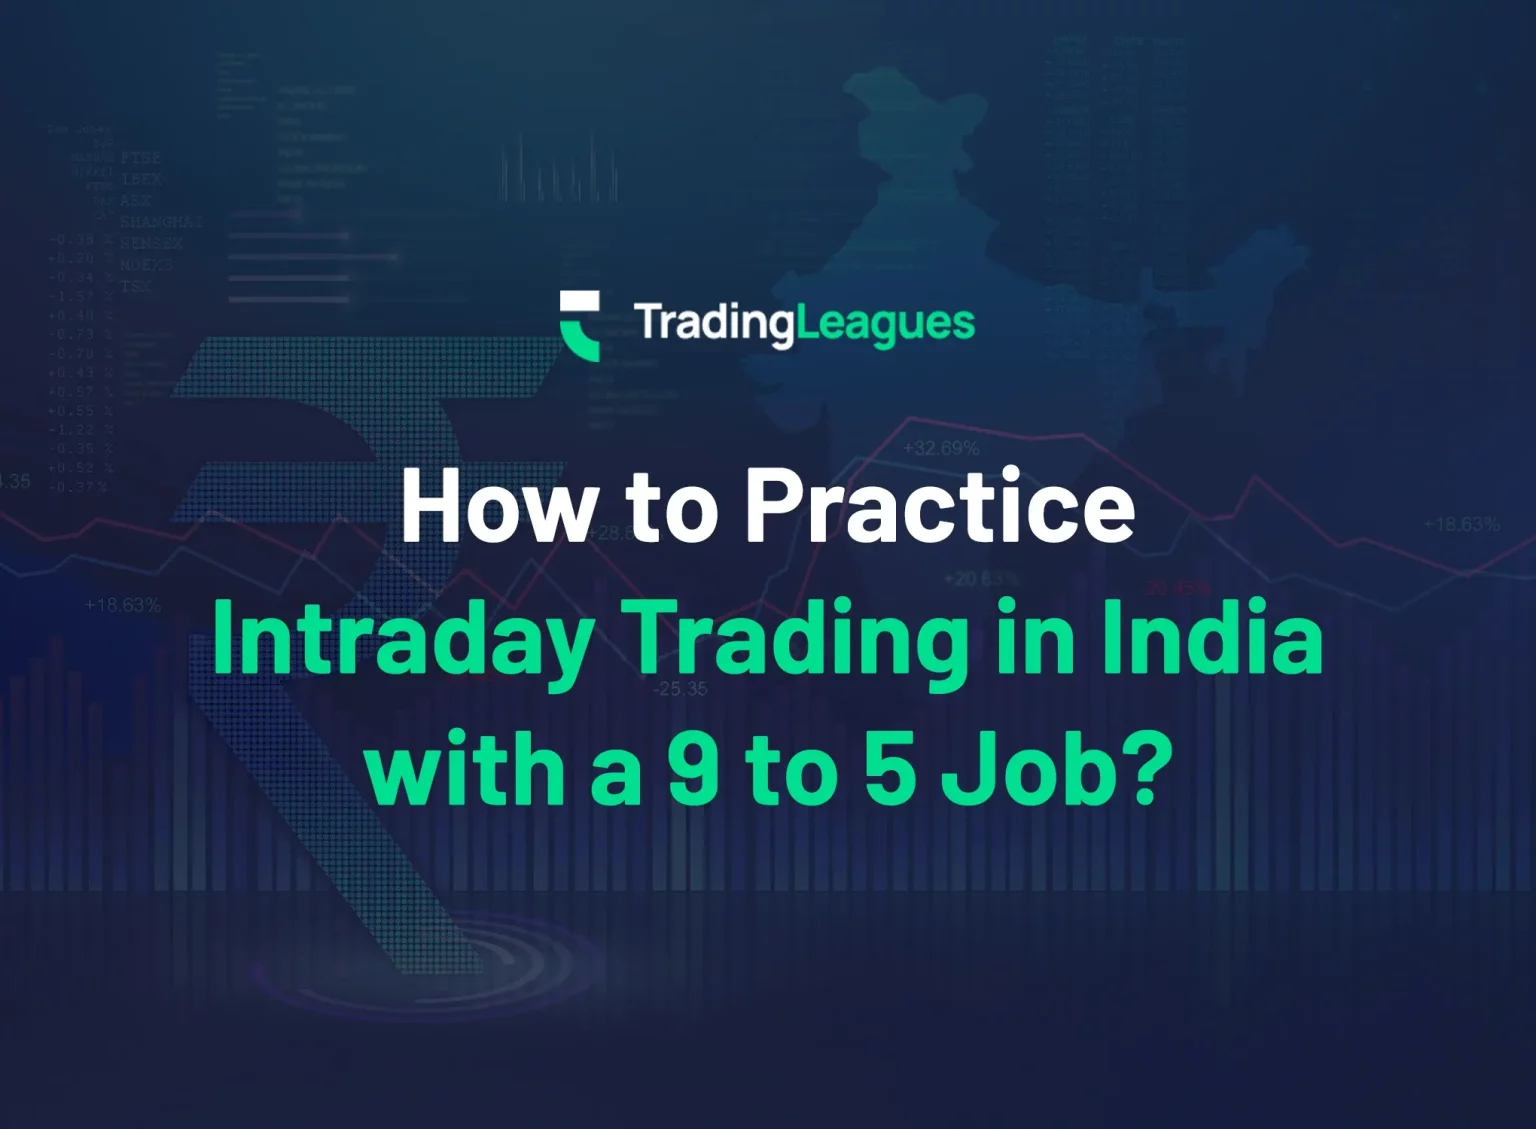 How to practise intraday trading in India while working 9 to 5